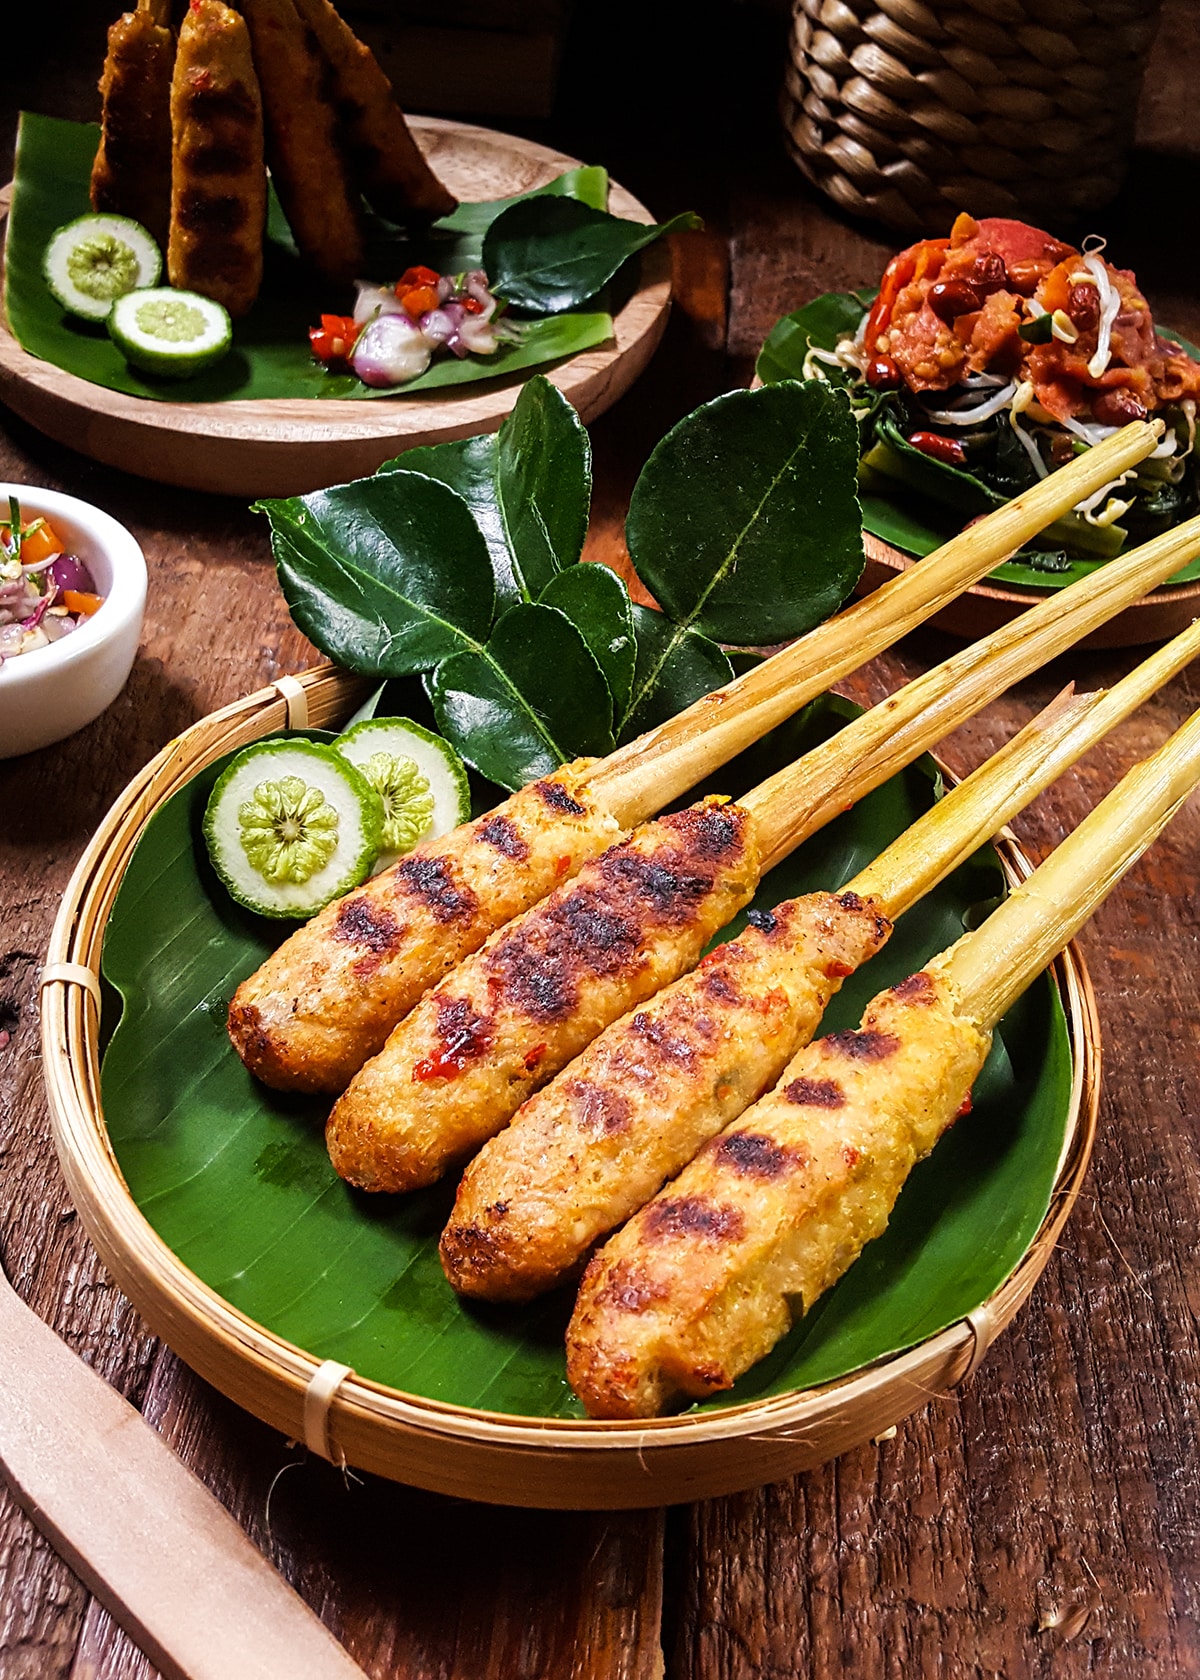 10 iconic dishes to try in Bali your next visit